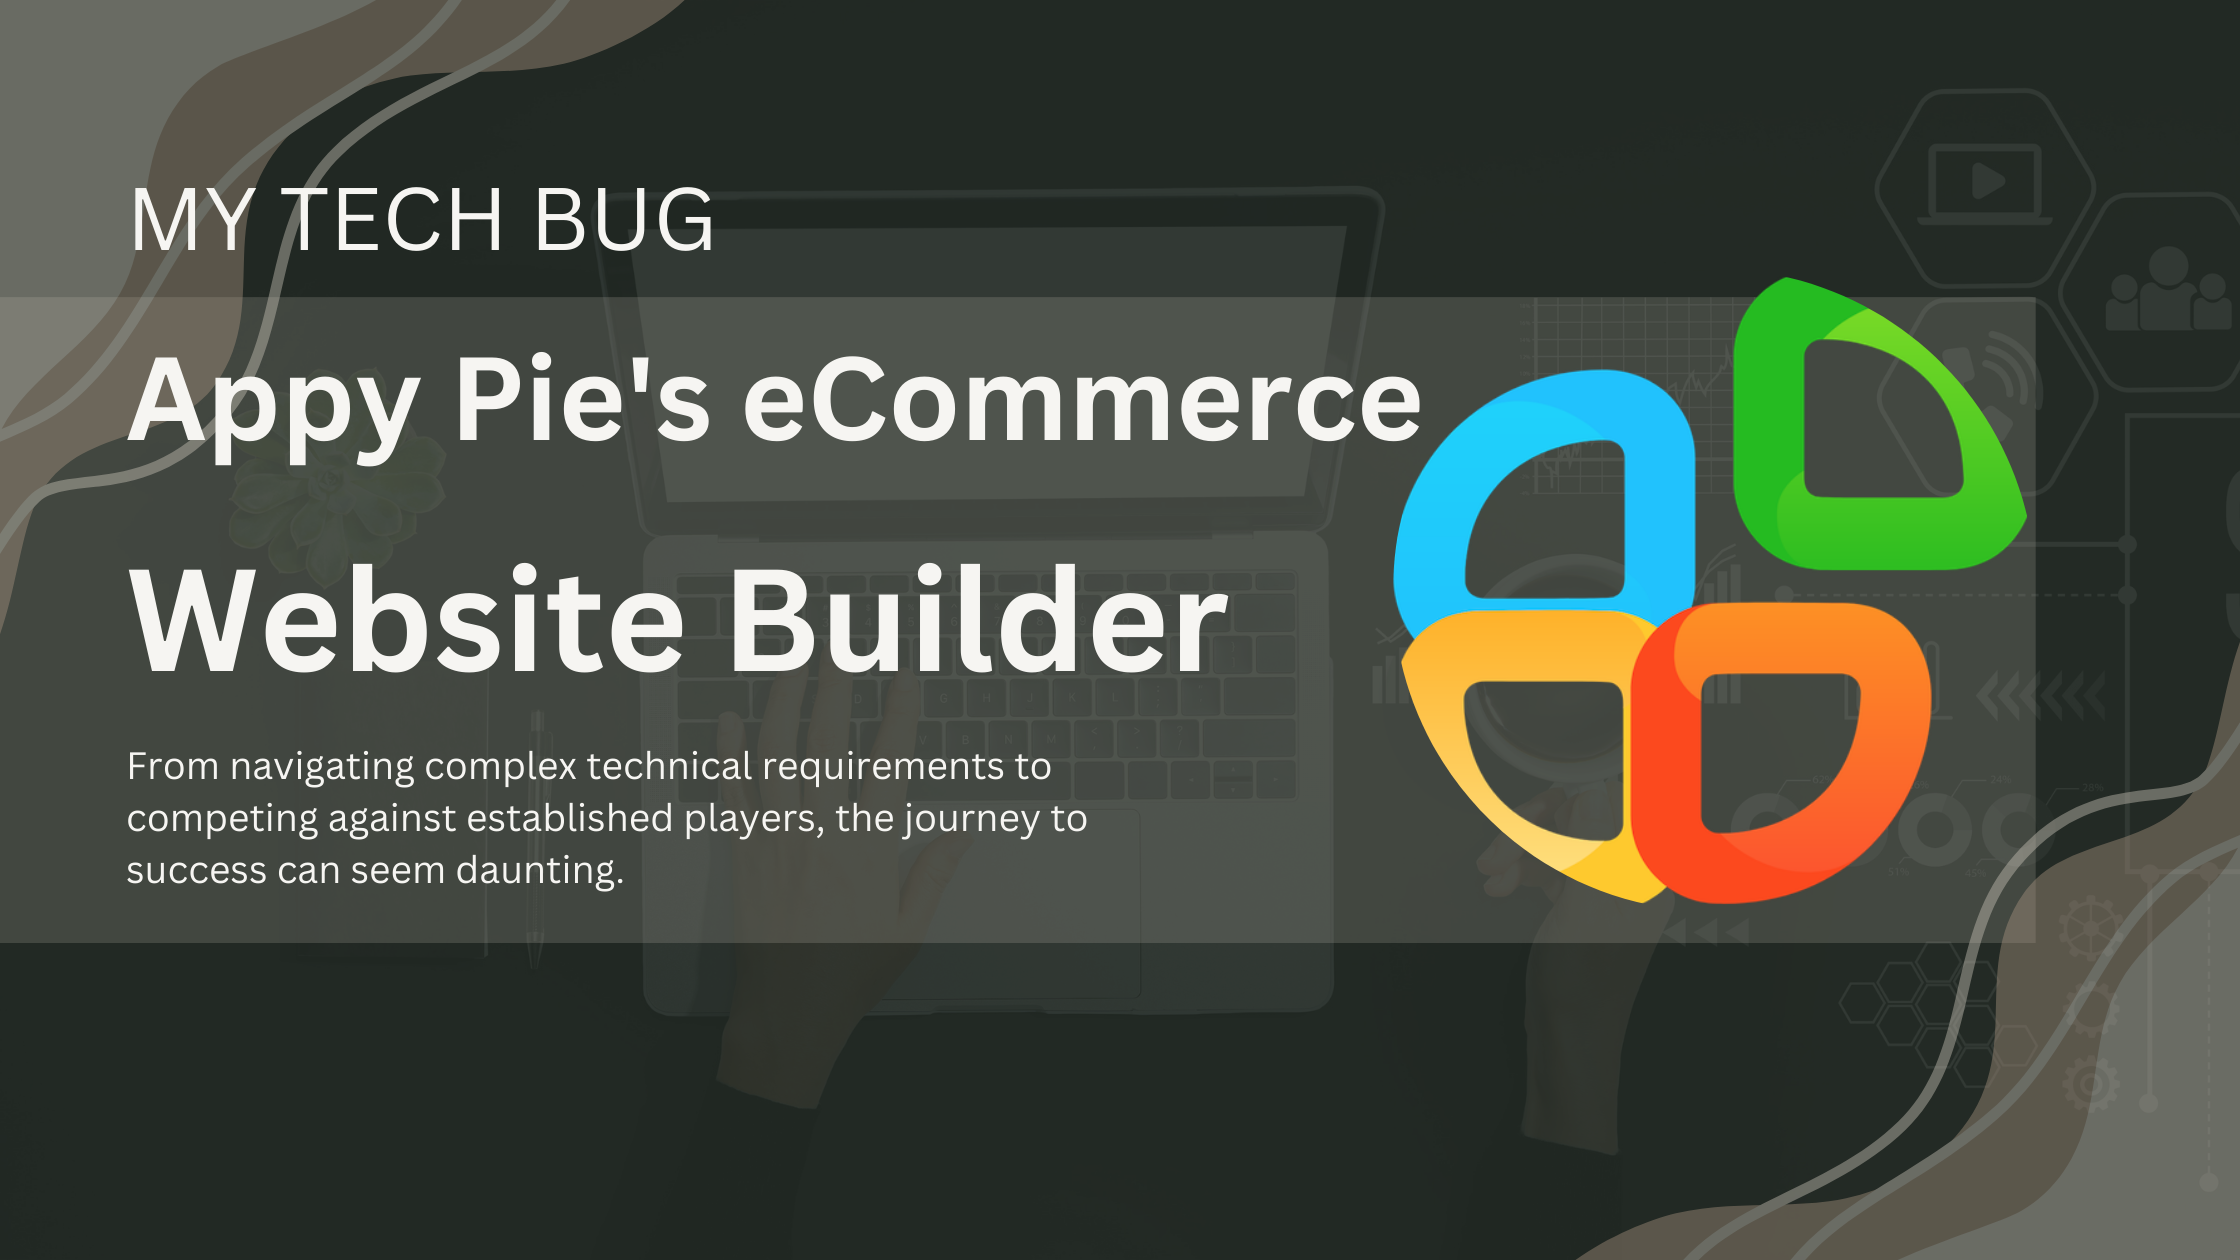 Empowering Entrepreneurs with Appy Pie’s eCommerce Website Builder